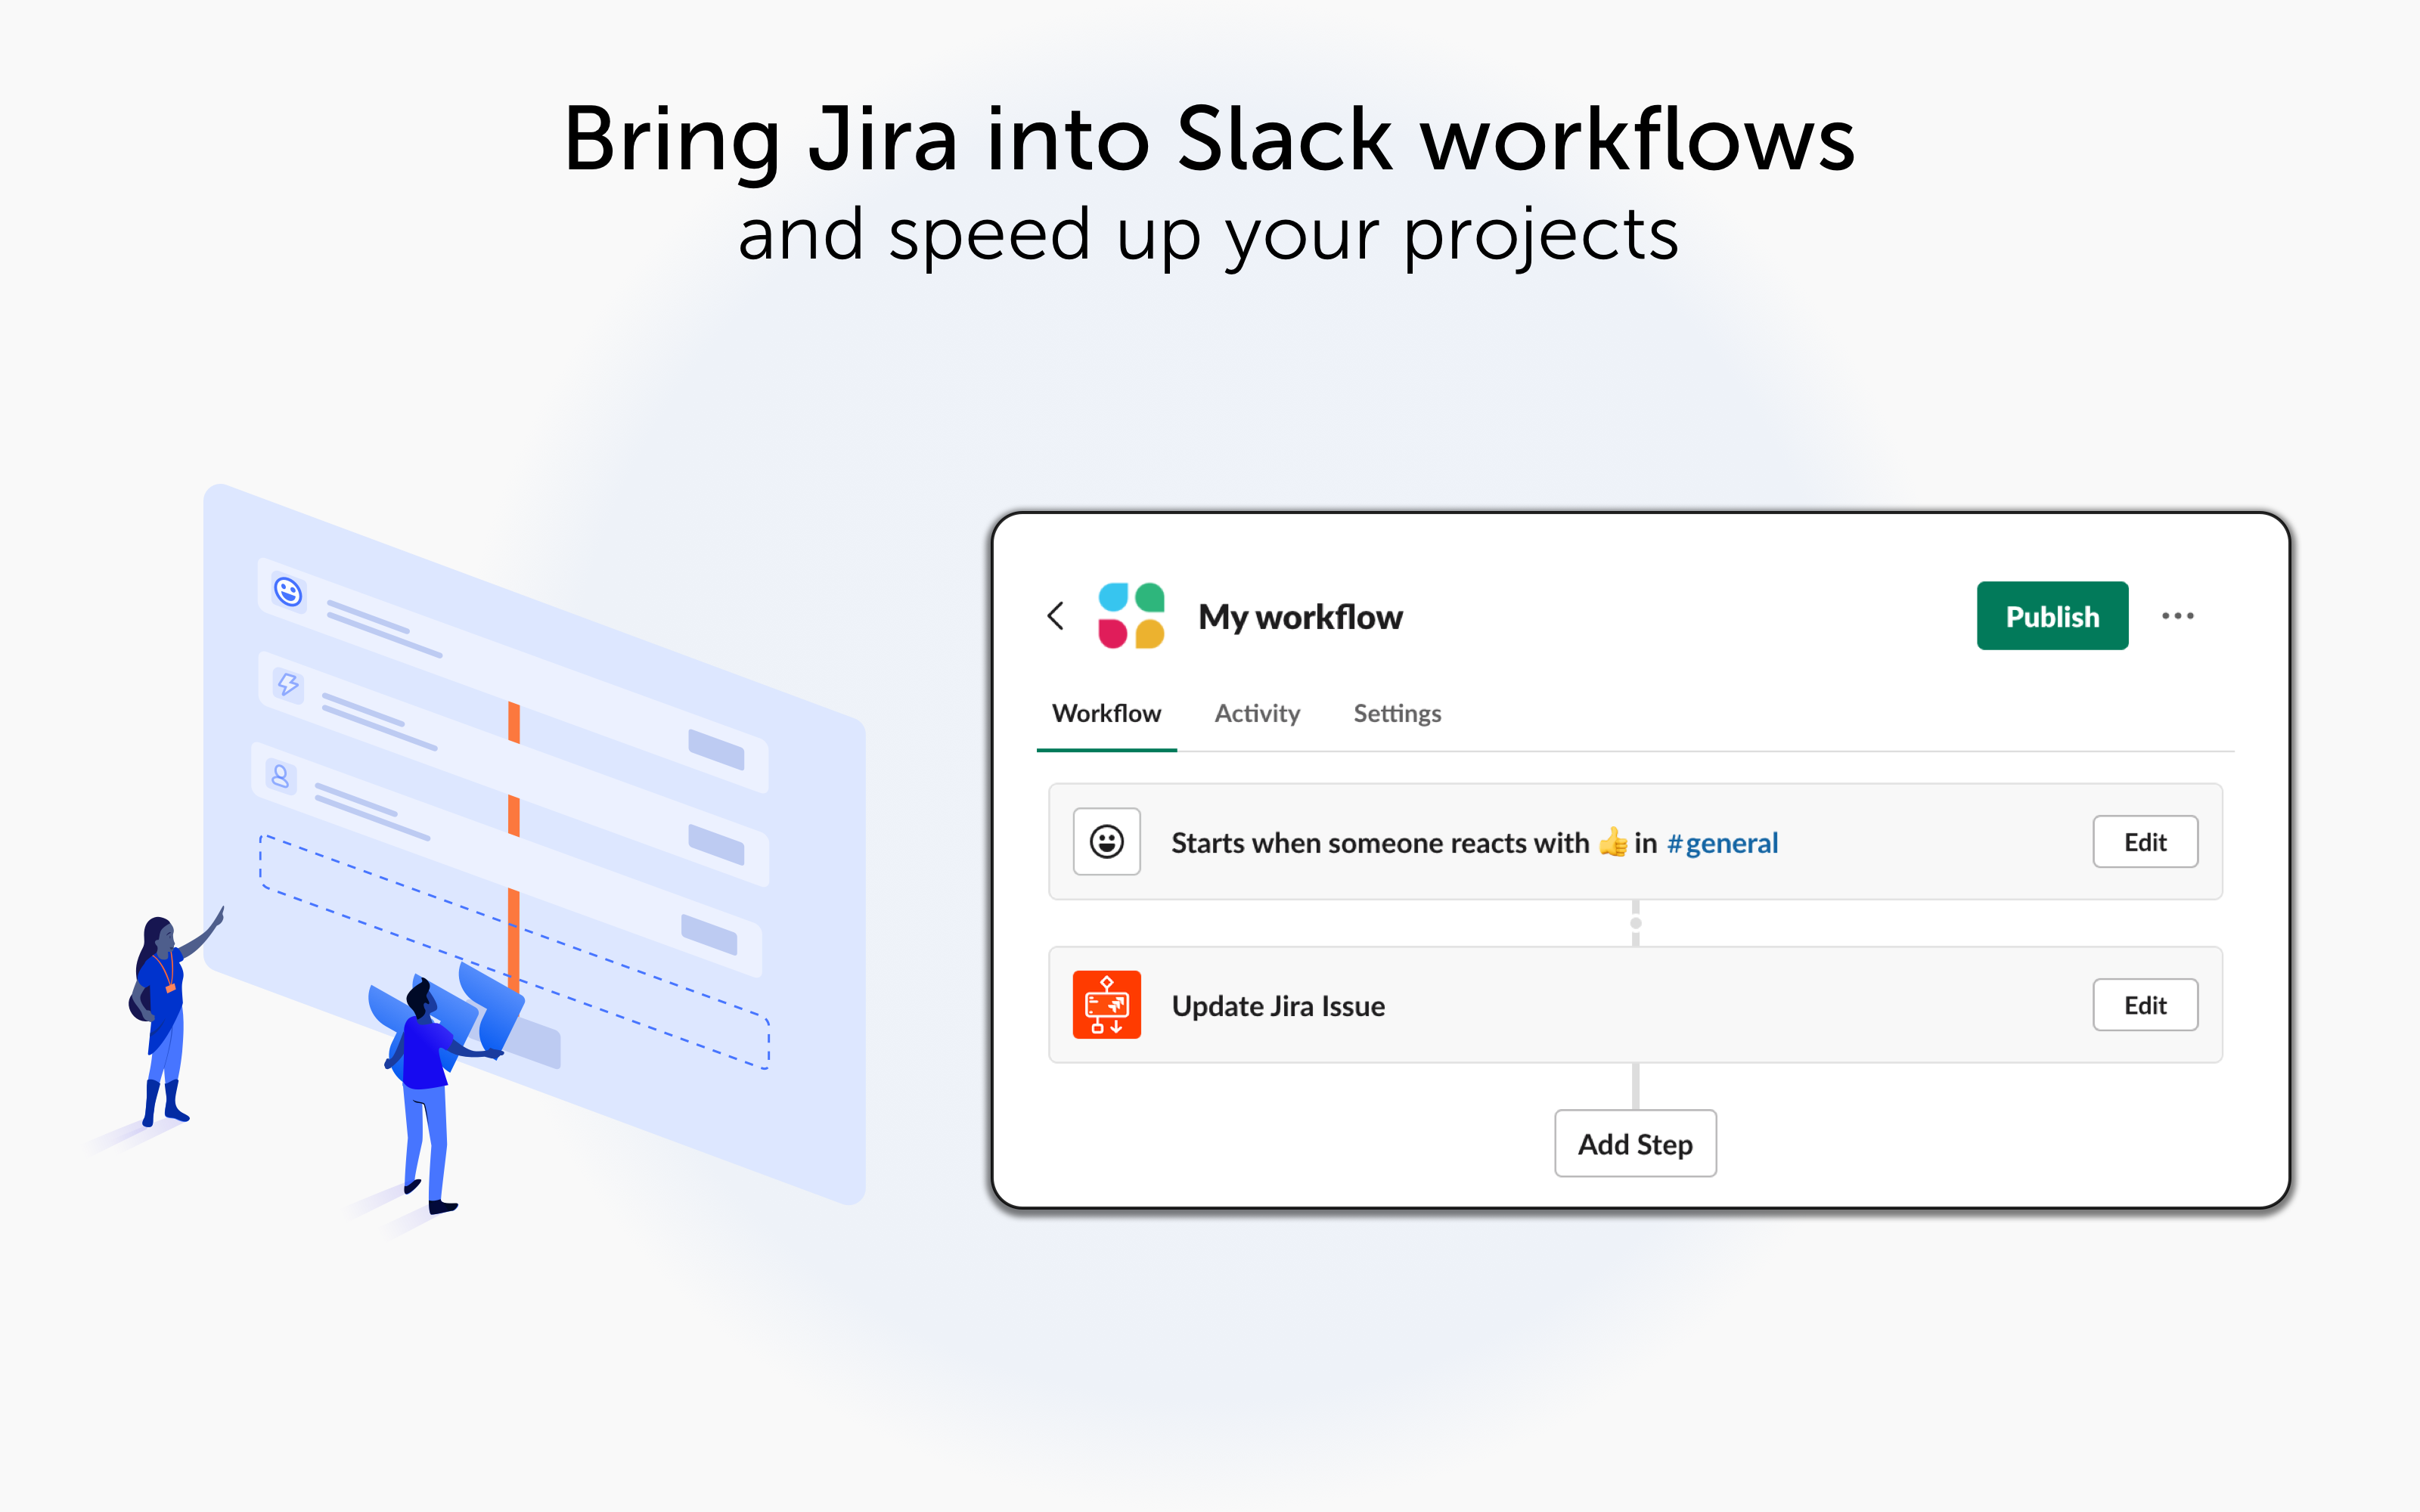 Jira Workflow Steps for Slack Software - Bring Jira into Slack workflows and speed up your projects. An illustration of two people carrying a Jira logo and bringing it onto Slack's Workflow Builder.